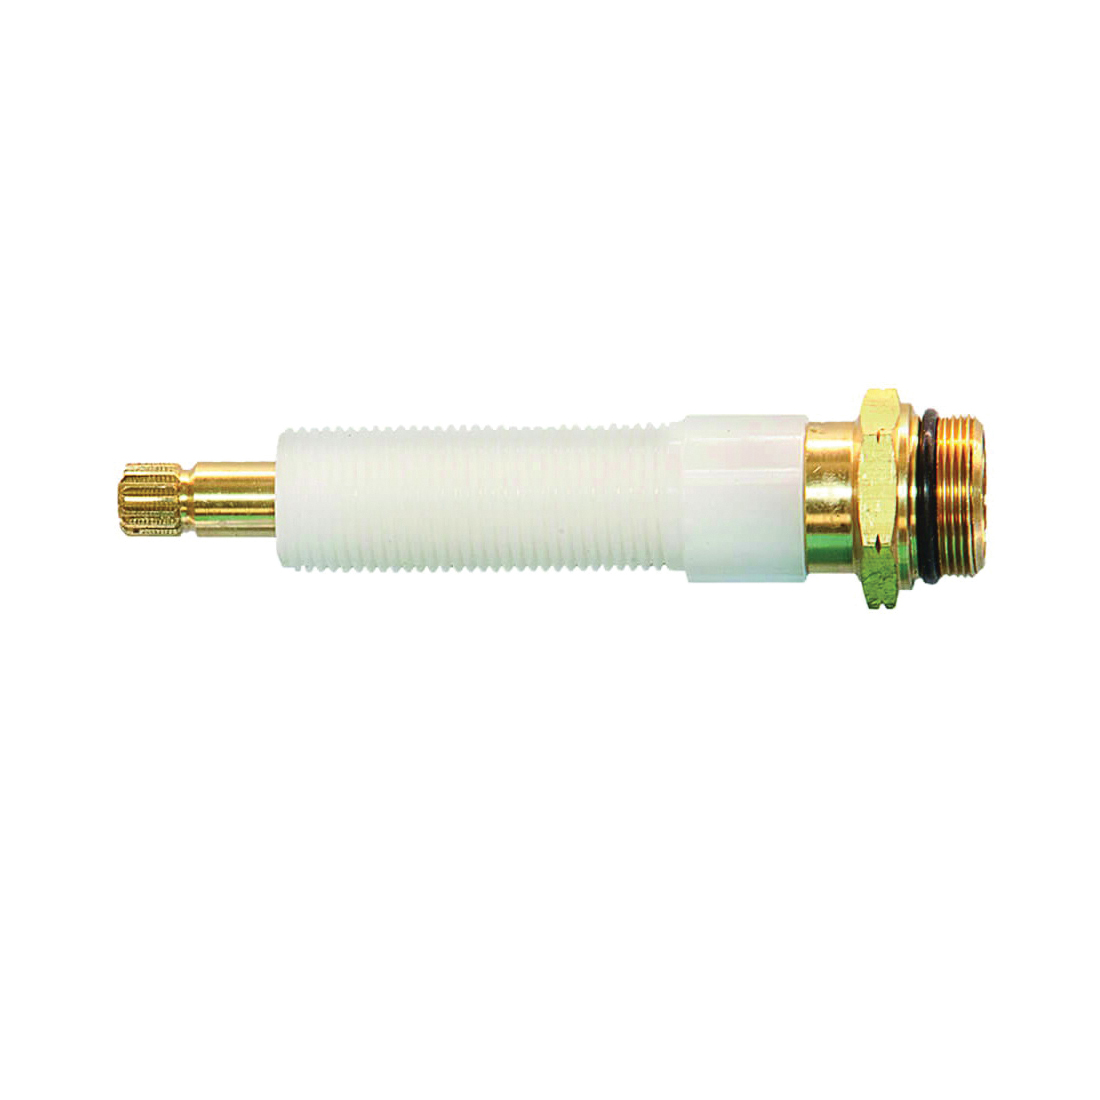 17491B Faucet Stem, Brass/Plastic, 4-7/32 in L, For: Kohler Two Handle Sink, Lavatory and Bath Faucets